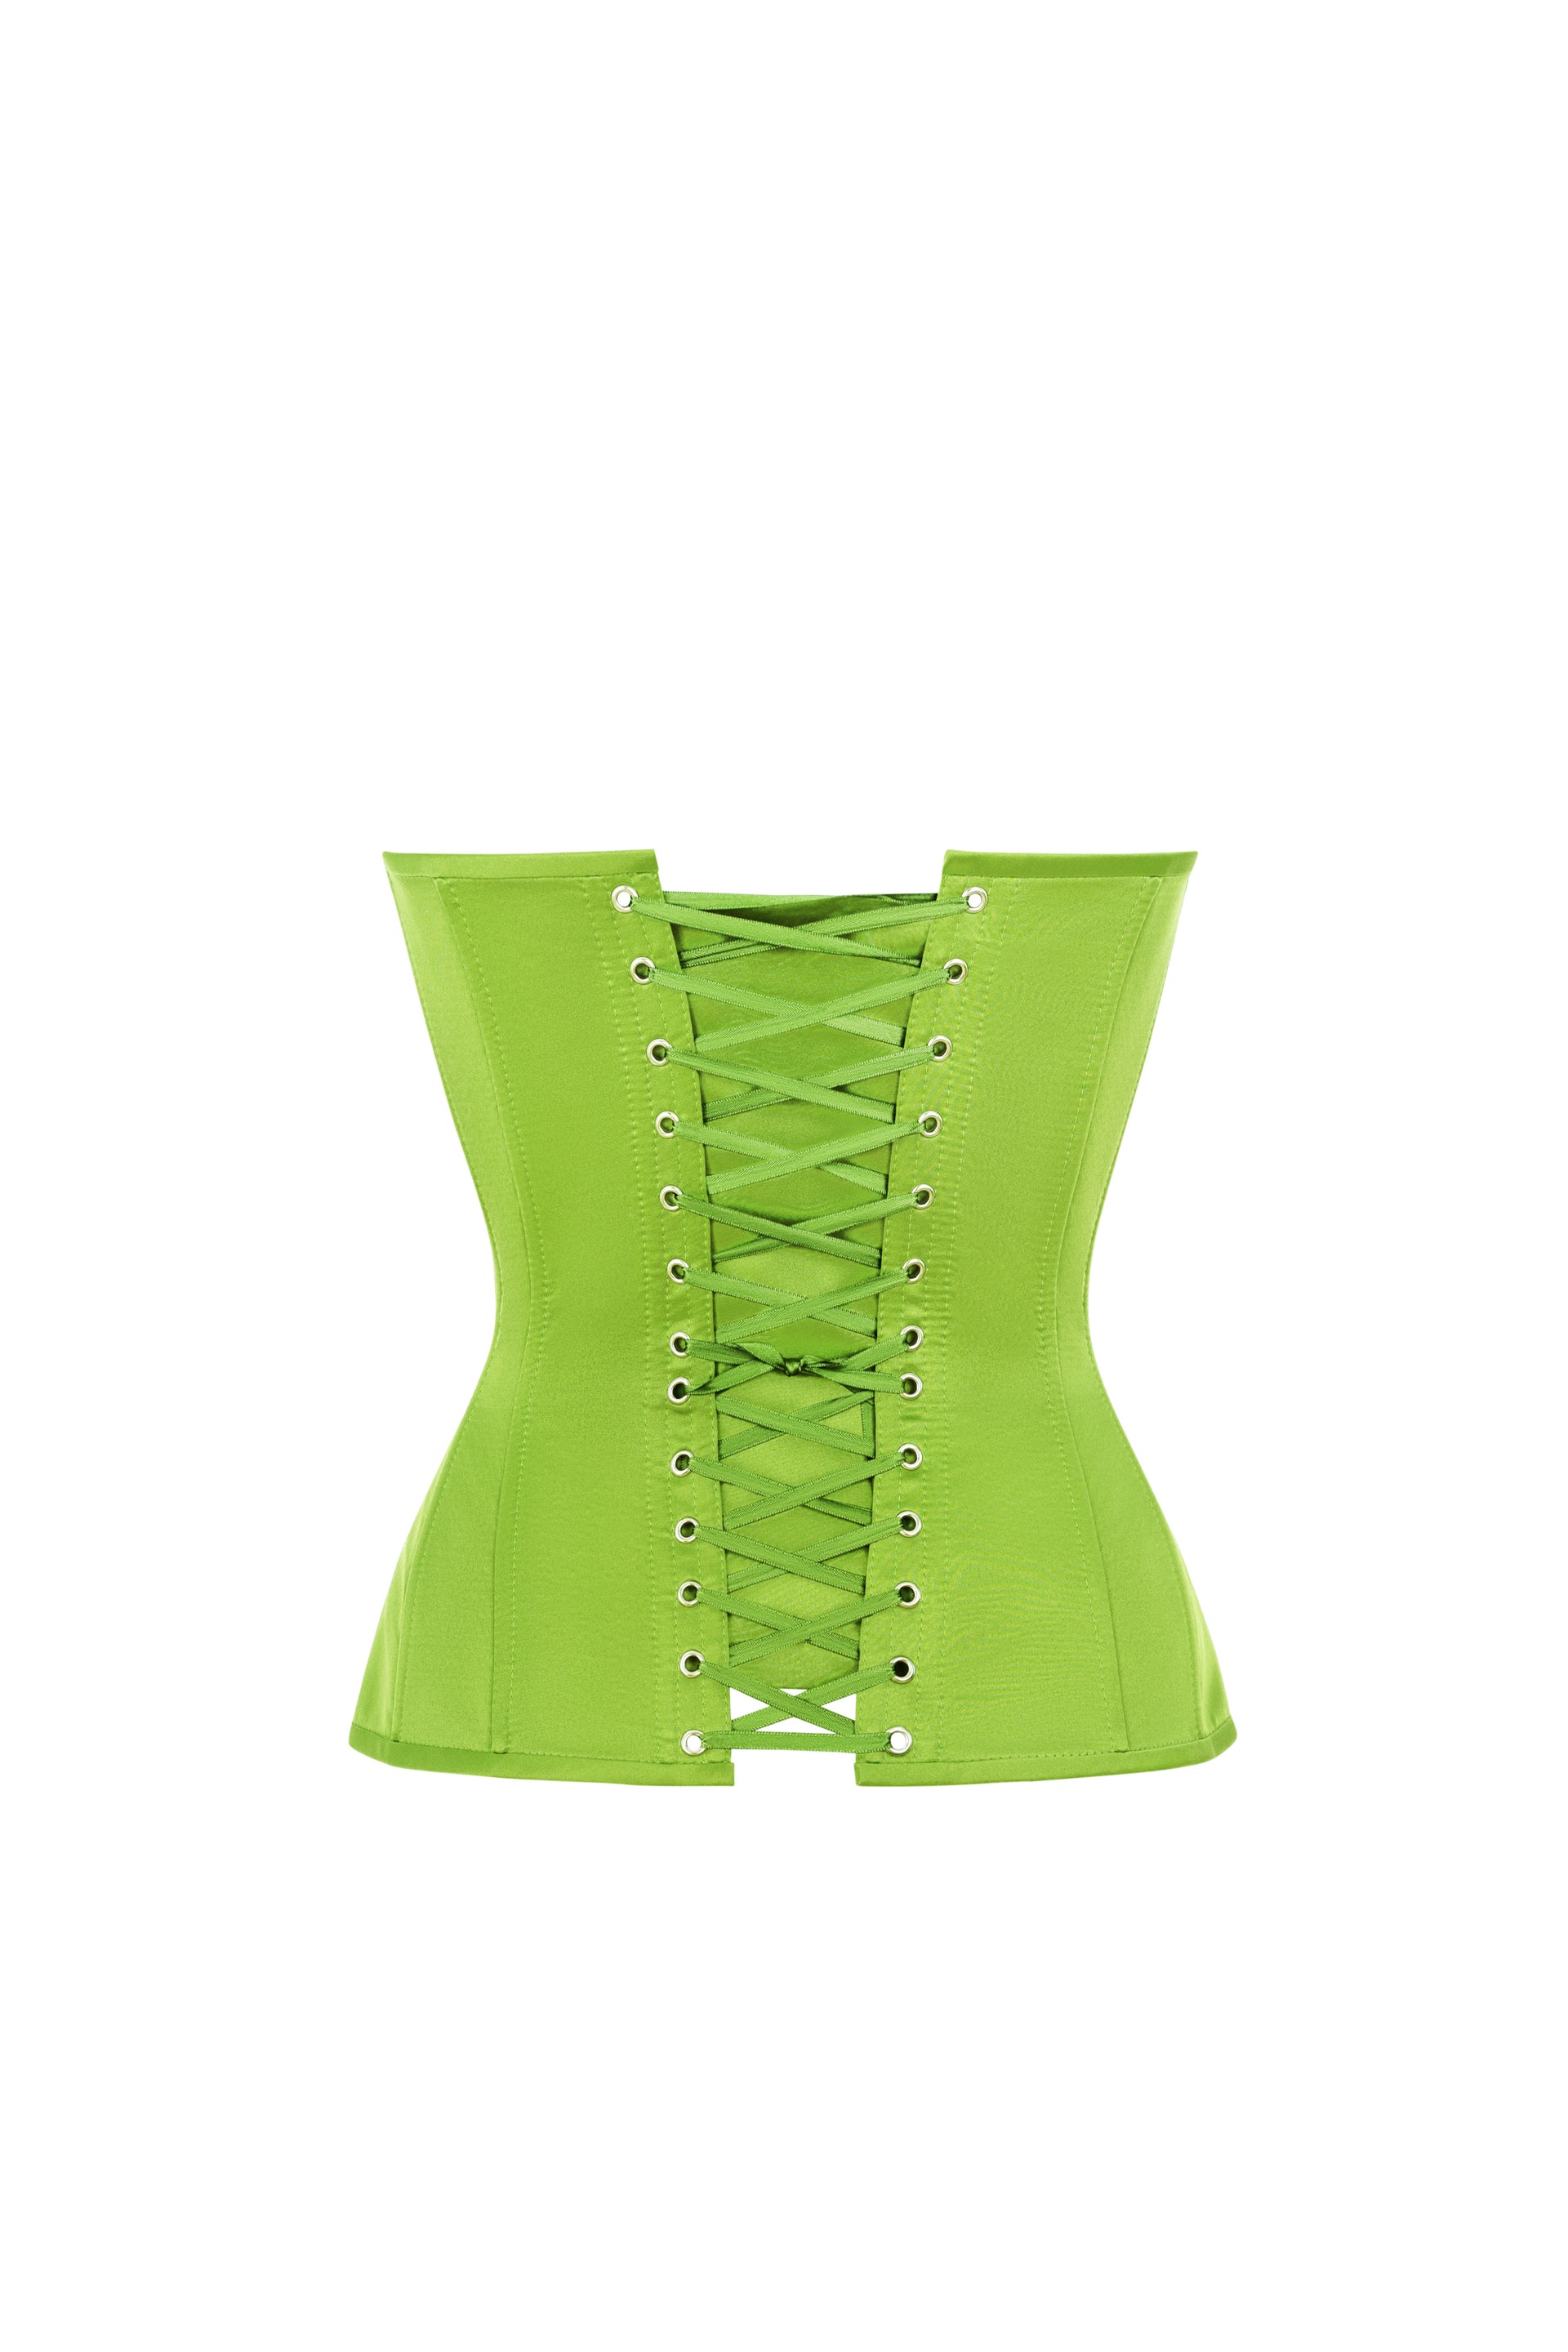 Light green satin corset with cups